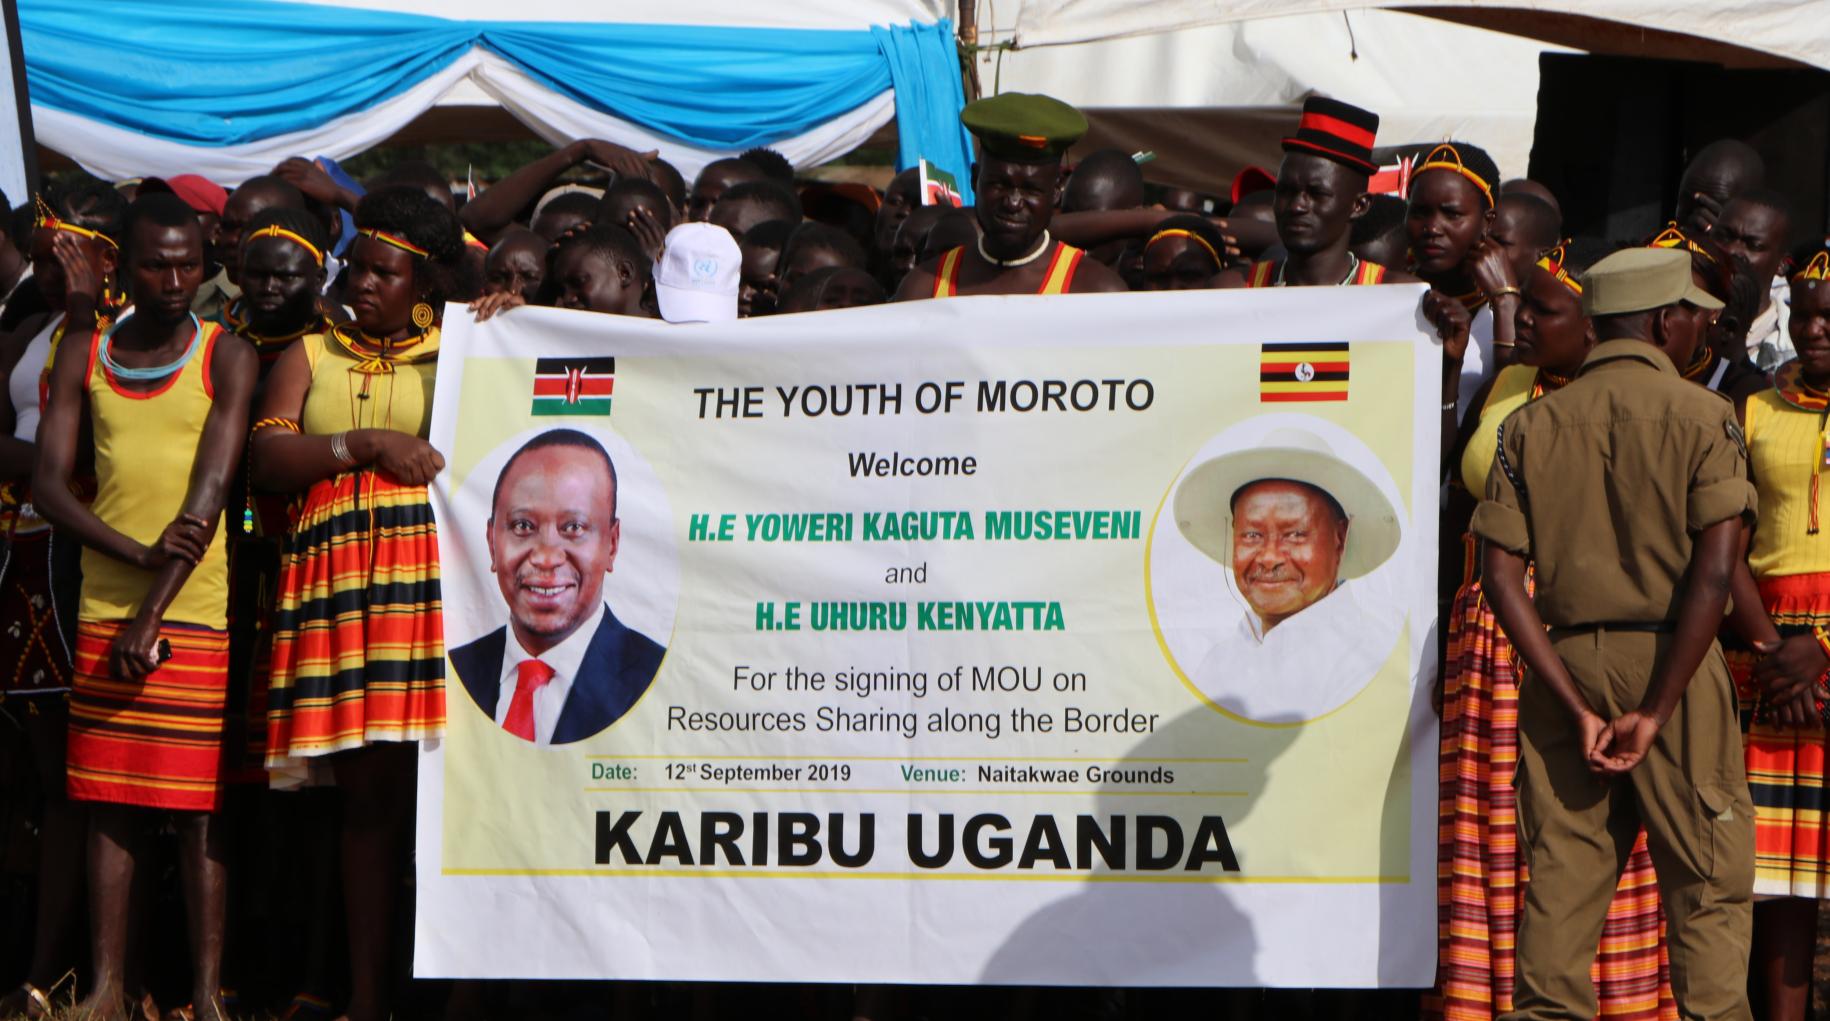 Shows a group of people holding a banner that shows heads of Kenya and Uganda.